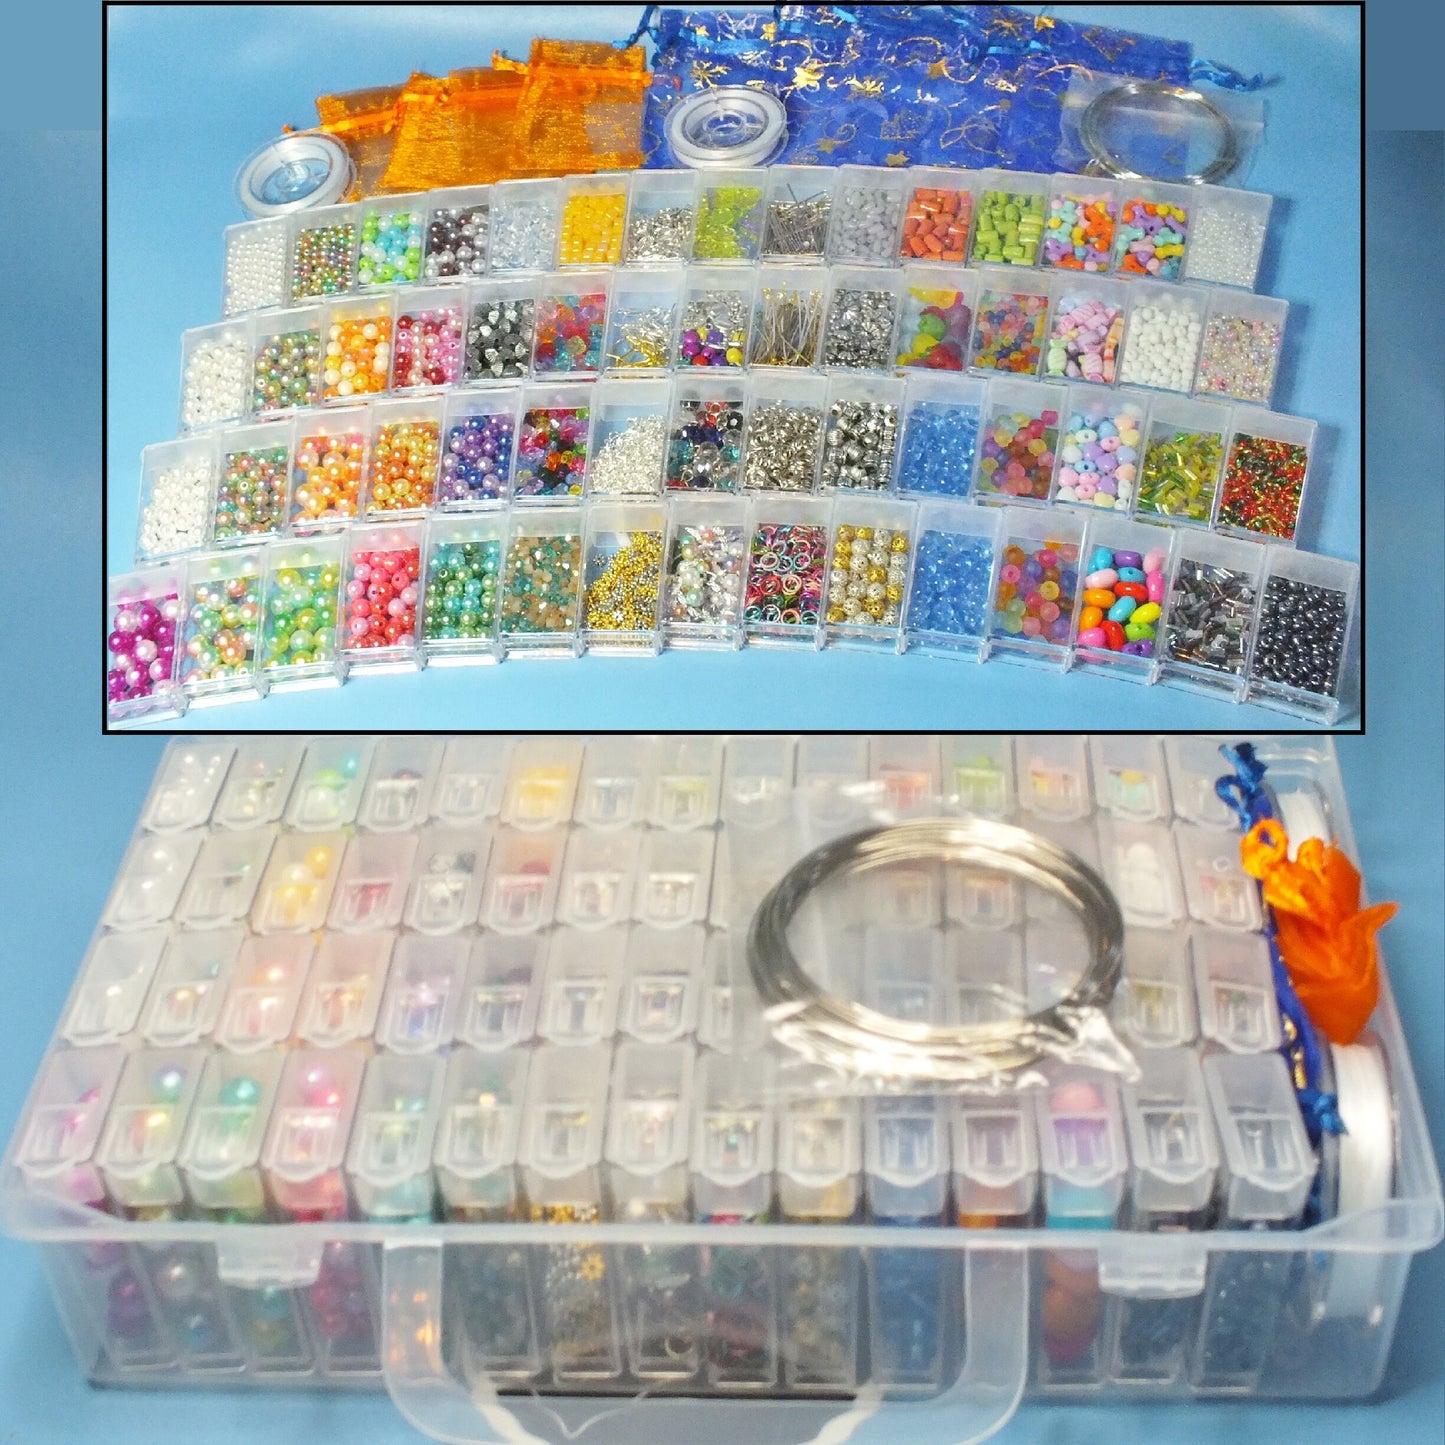 Ultimate jewellery making gift. Beads, charms, findings, thread etc in carrycase with 60 reusable boxes.